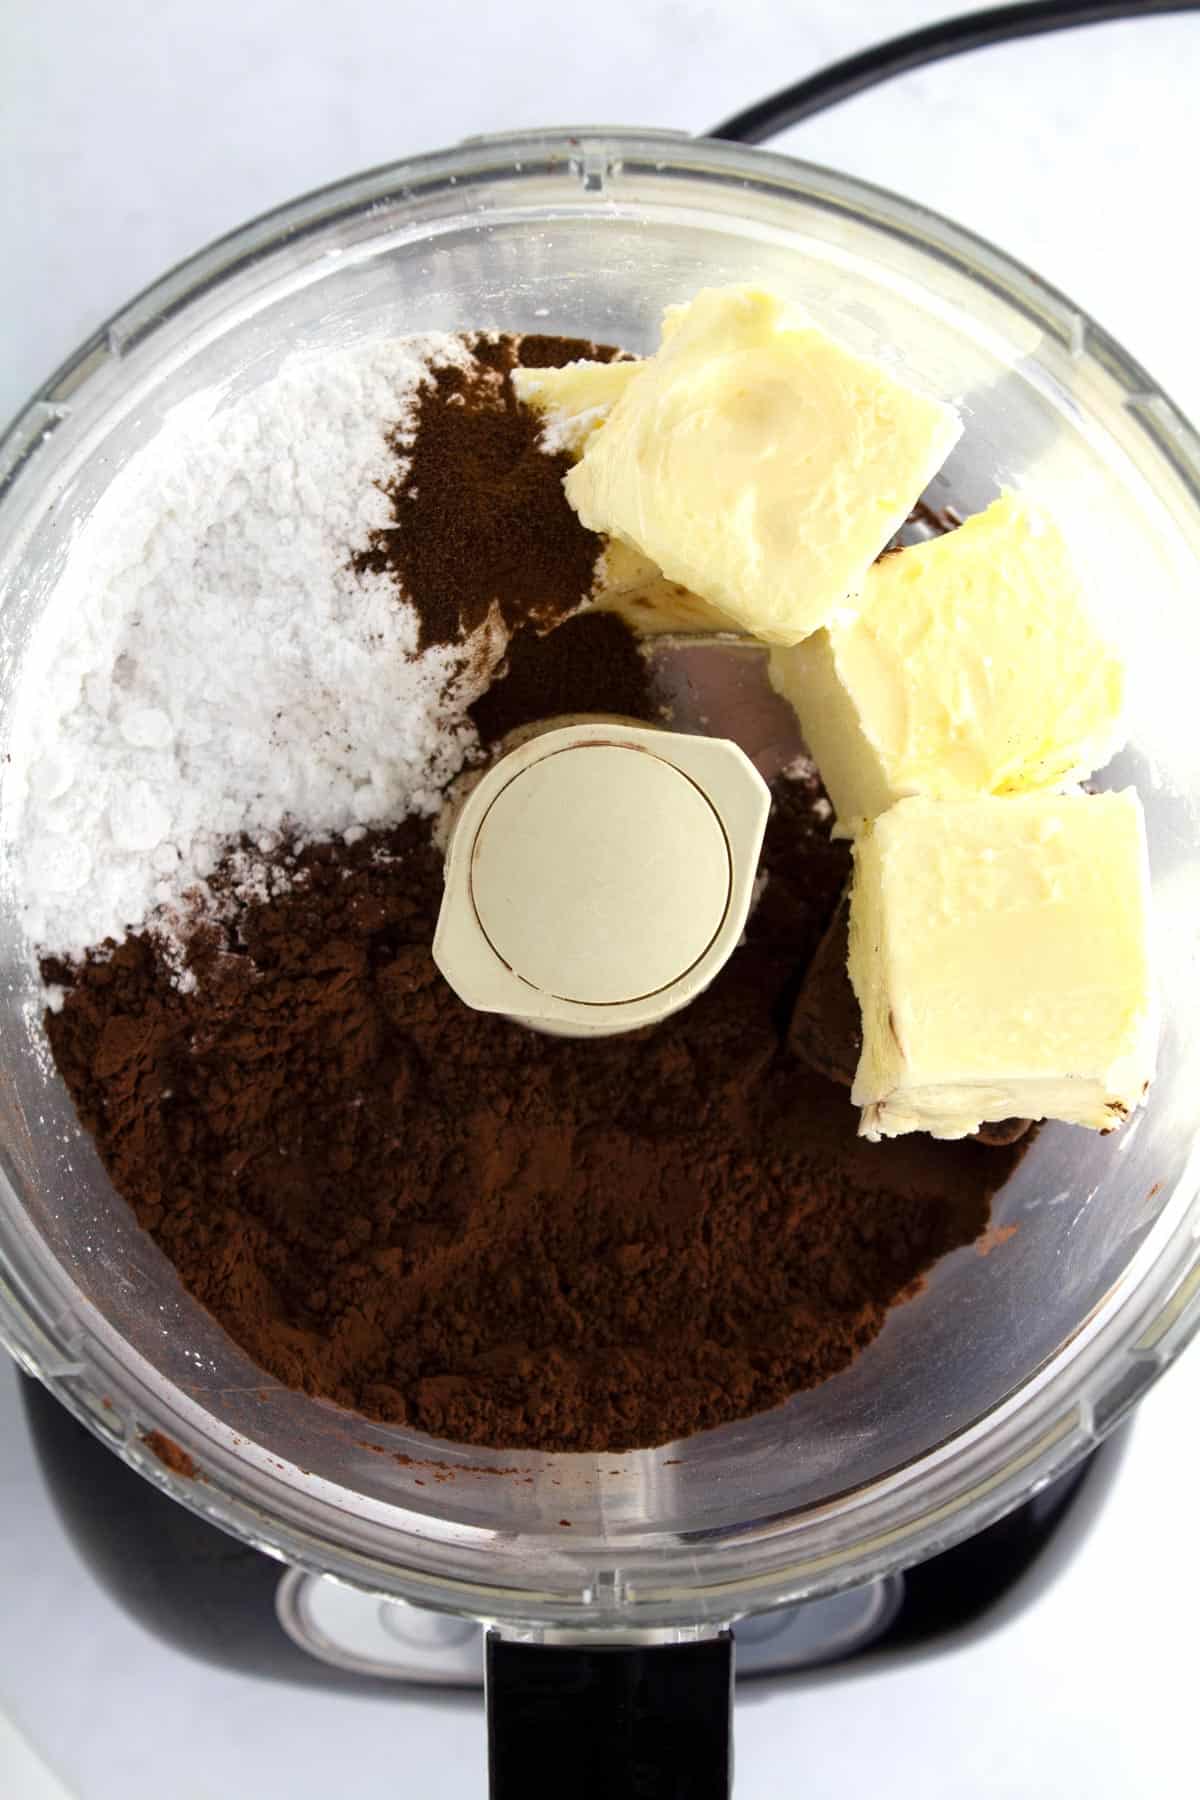 Ingredients for chocolate frosting in a clear food processor before combining.